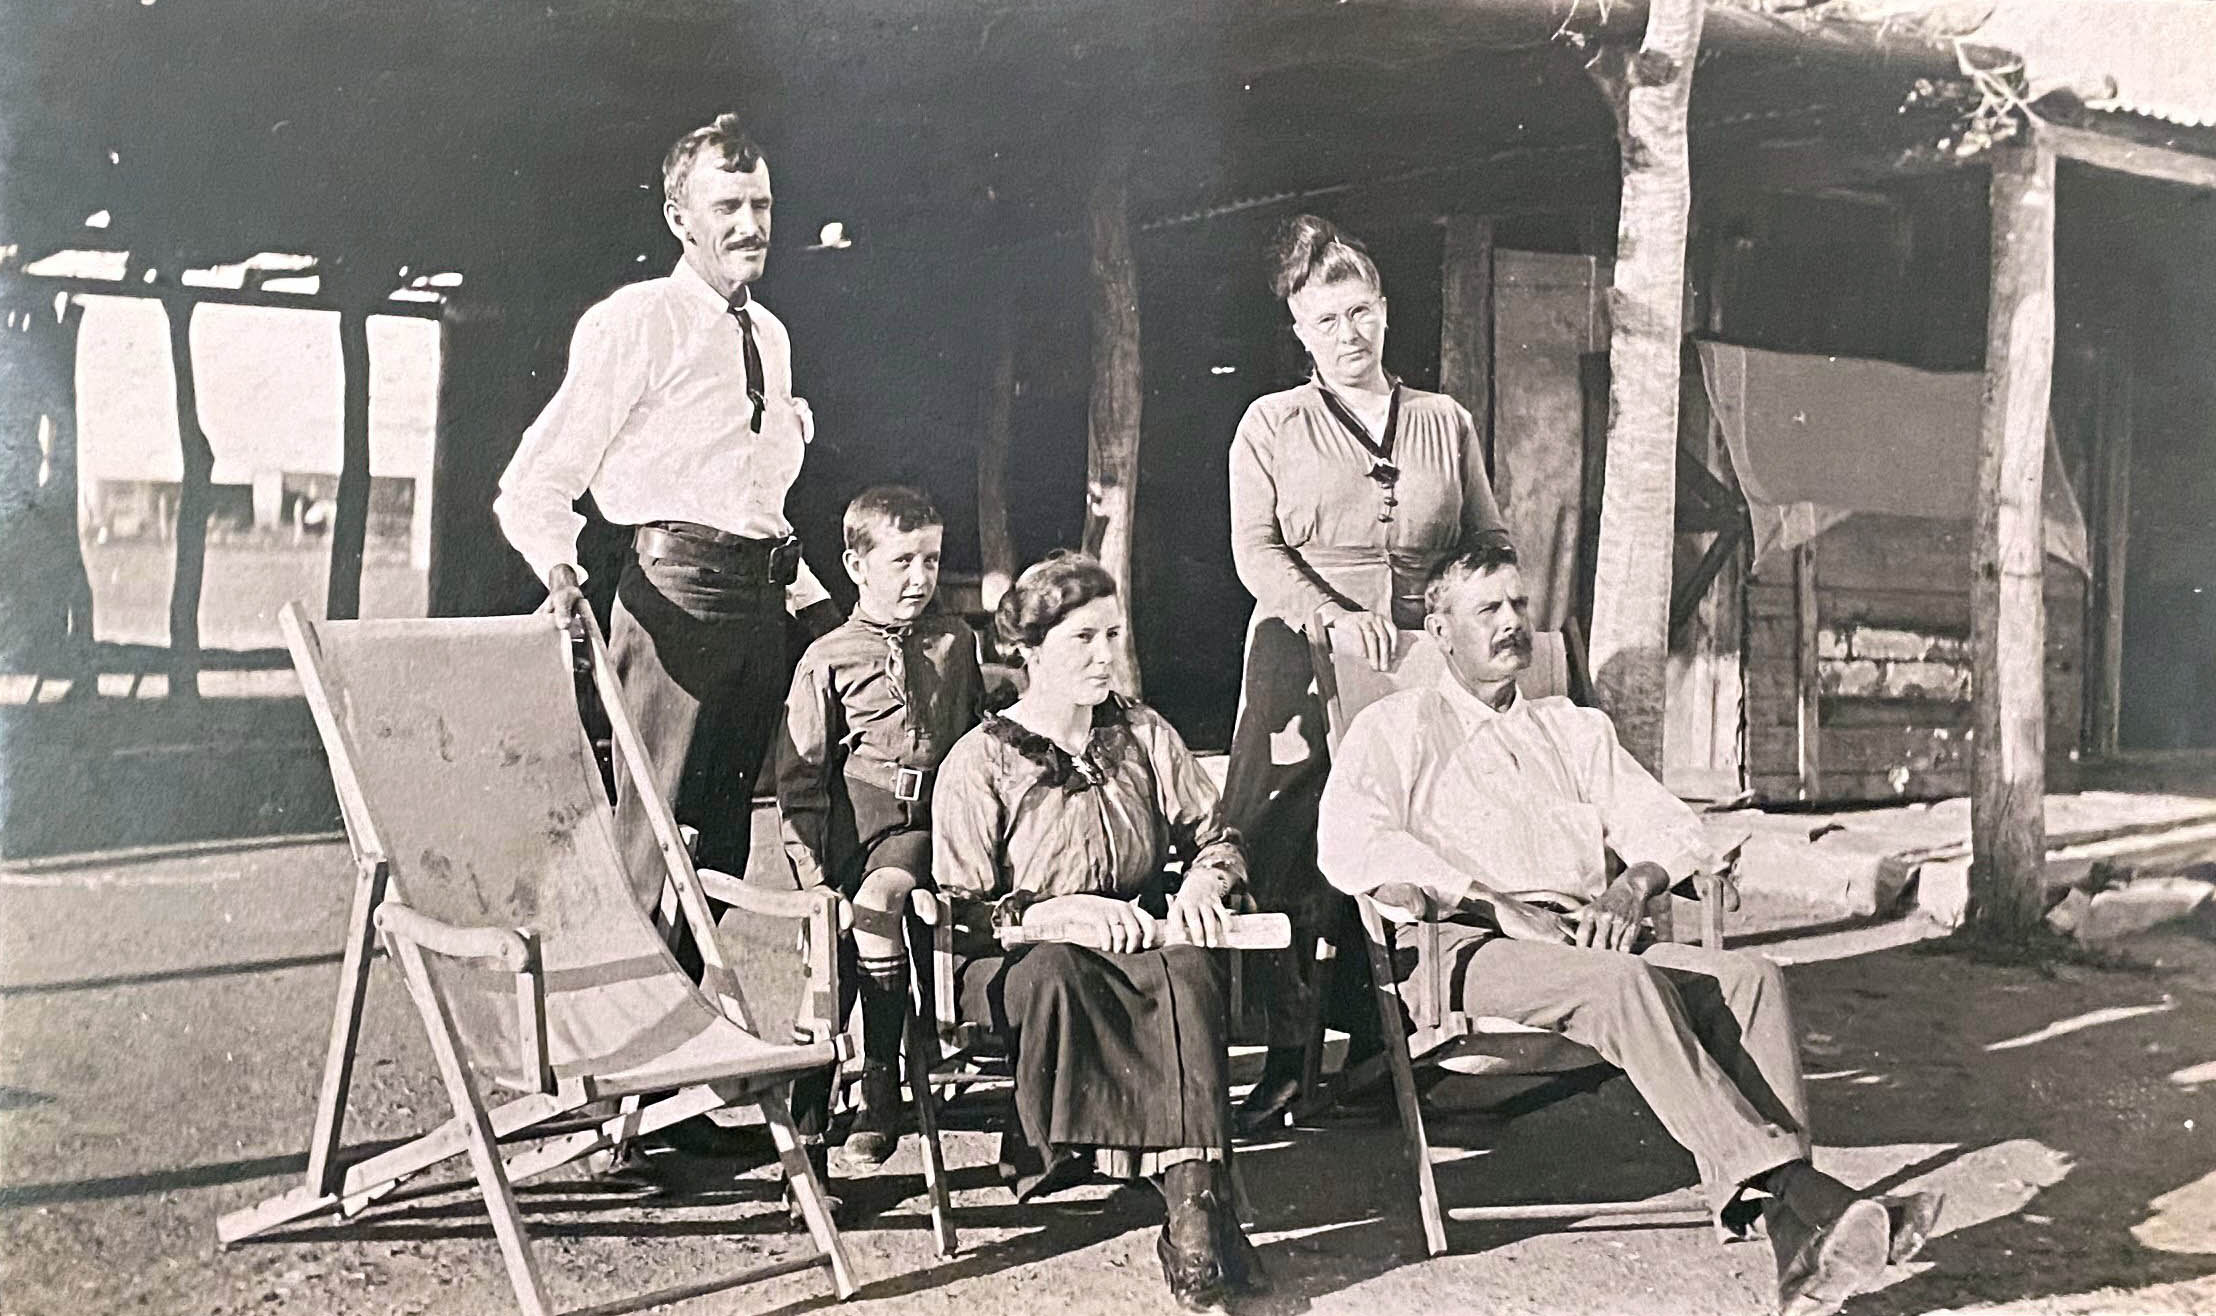 Manager Hopkins Thomas and family with M. Fowles at Headingly Station, Queensland, undated (160-337).